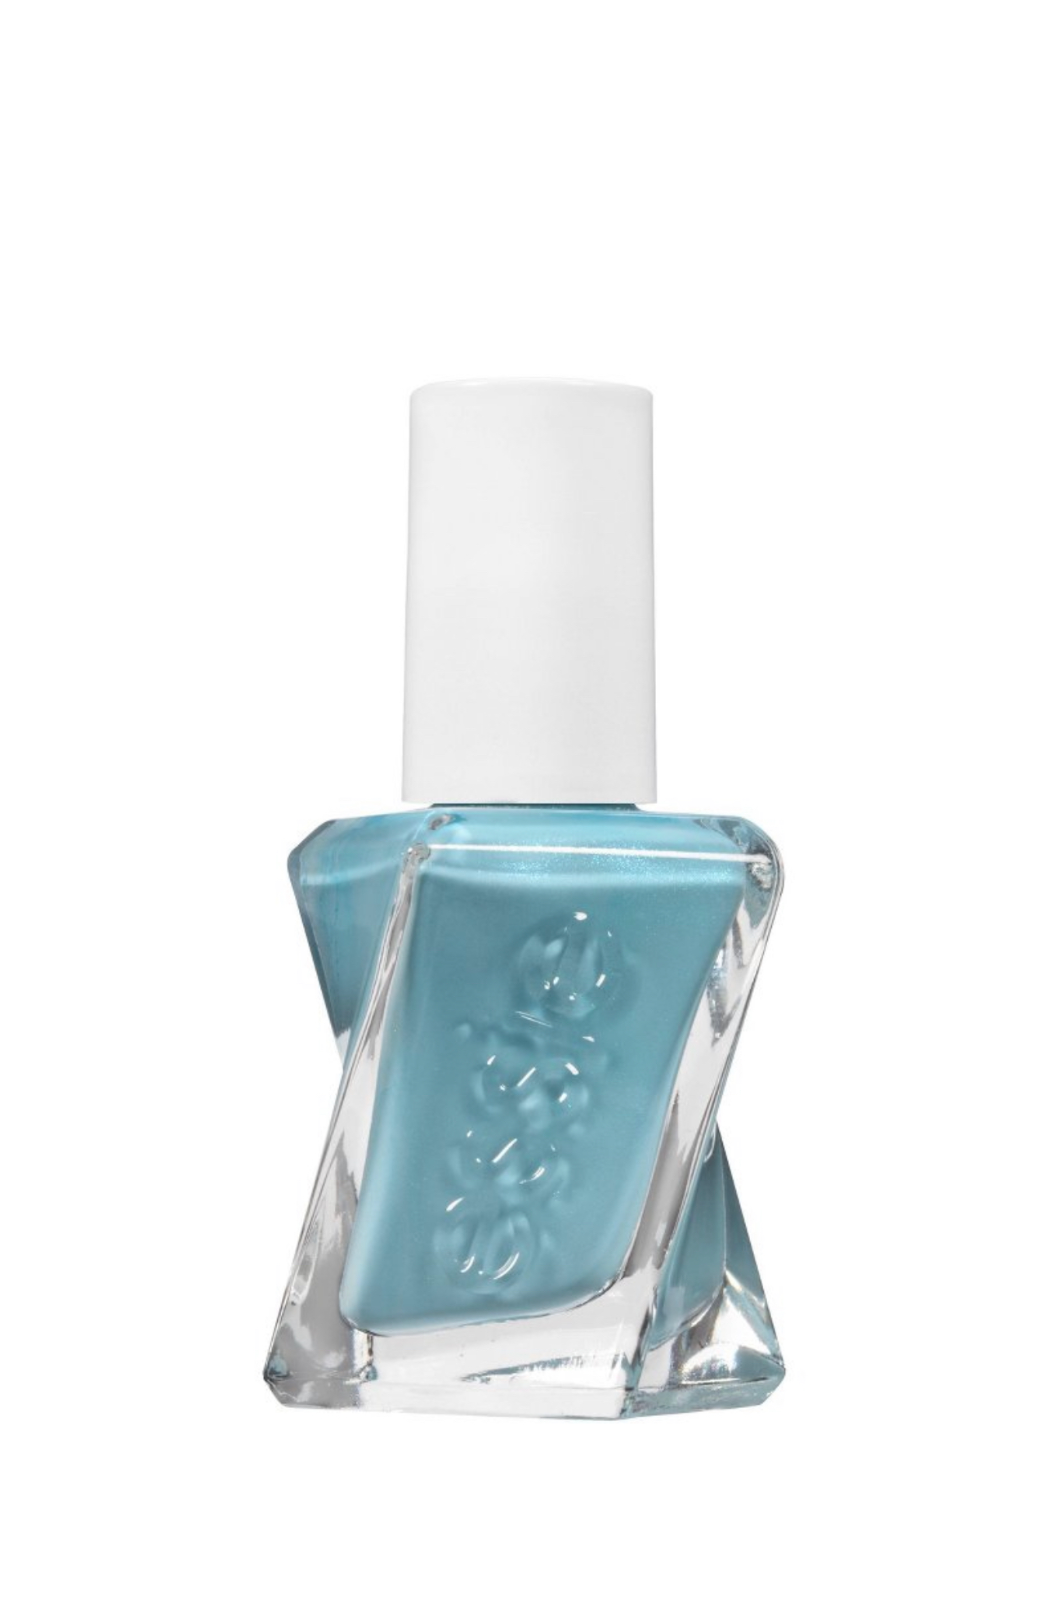 Primary image for Essie Gel Couture Nail Polish - 0.46 fl. oz. - You Choose Color